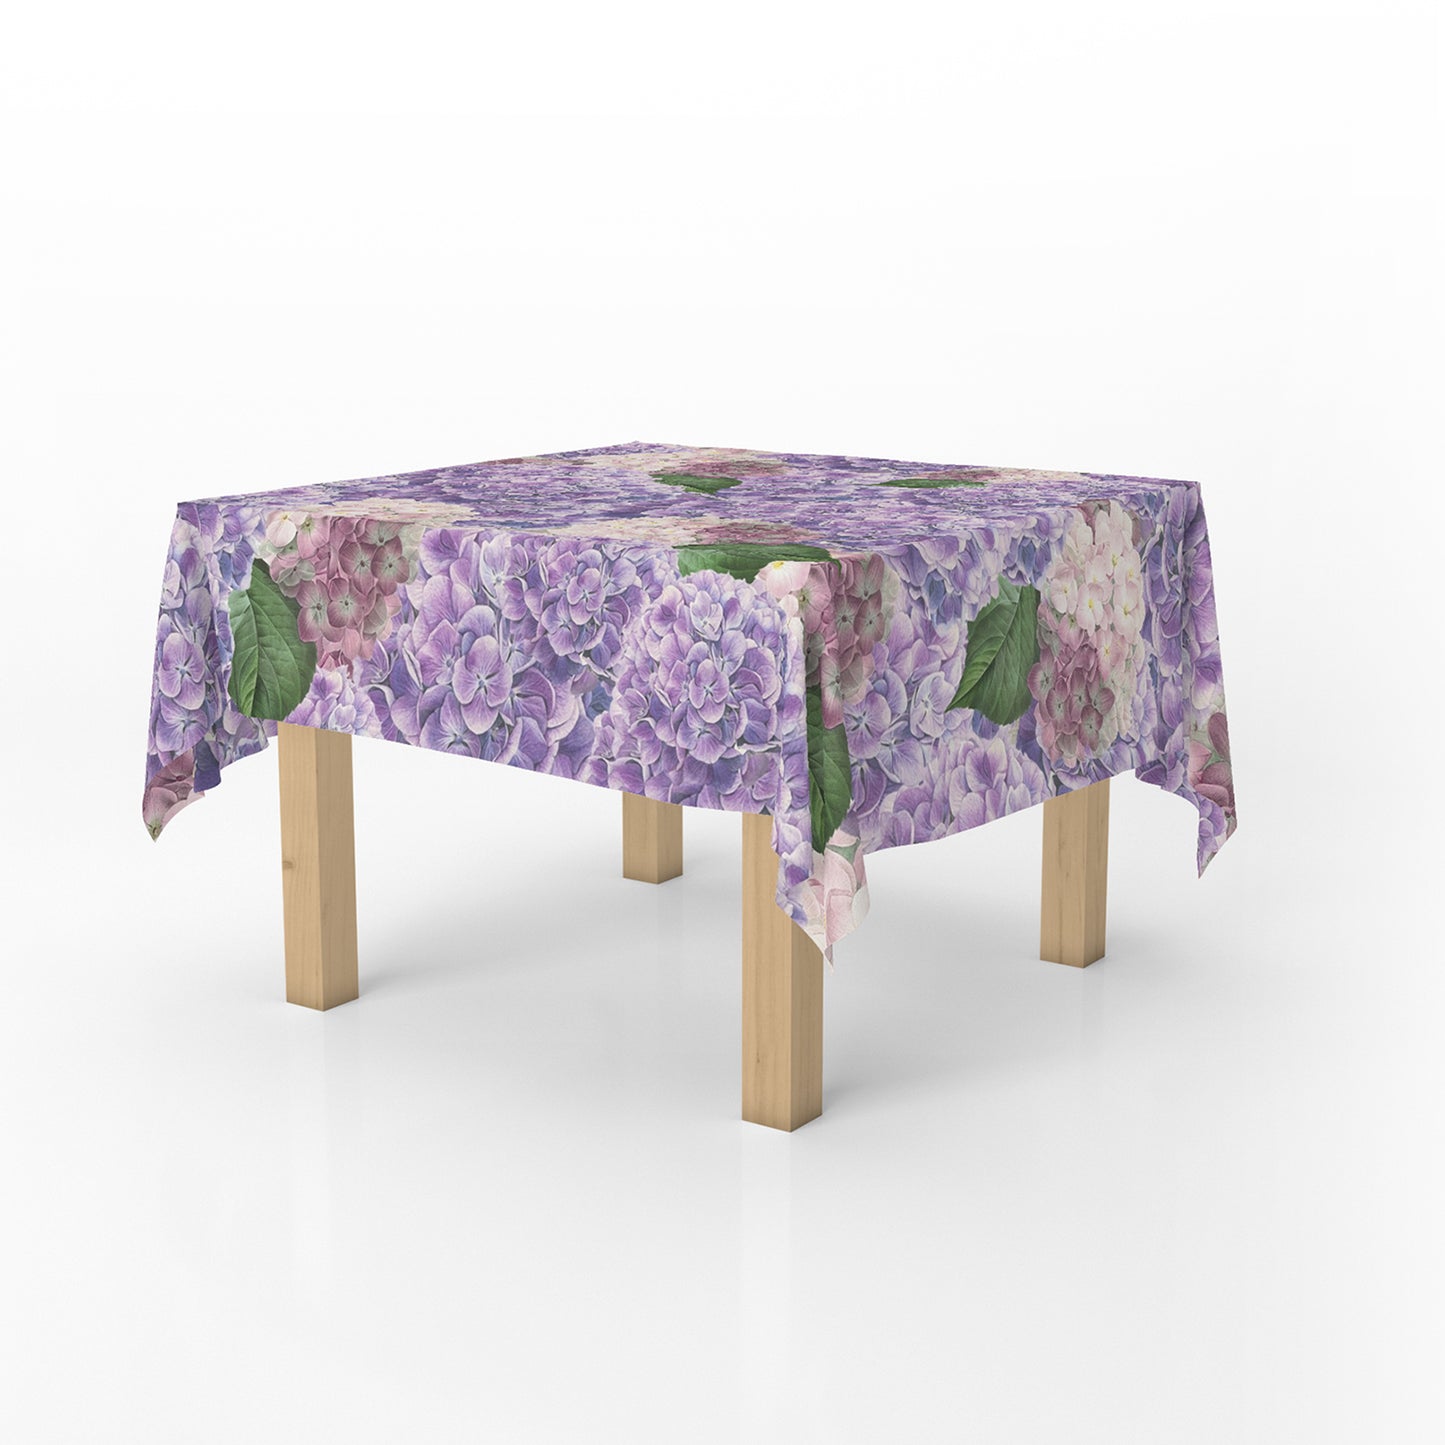 Mix of Purple and White Floral Square Tablecloth By Mark Van Vuuren